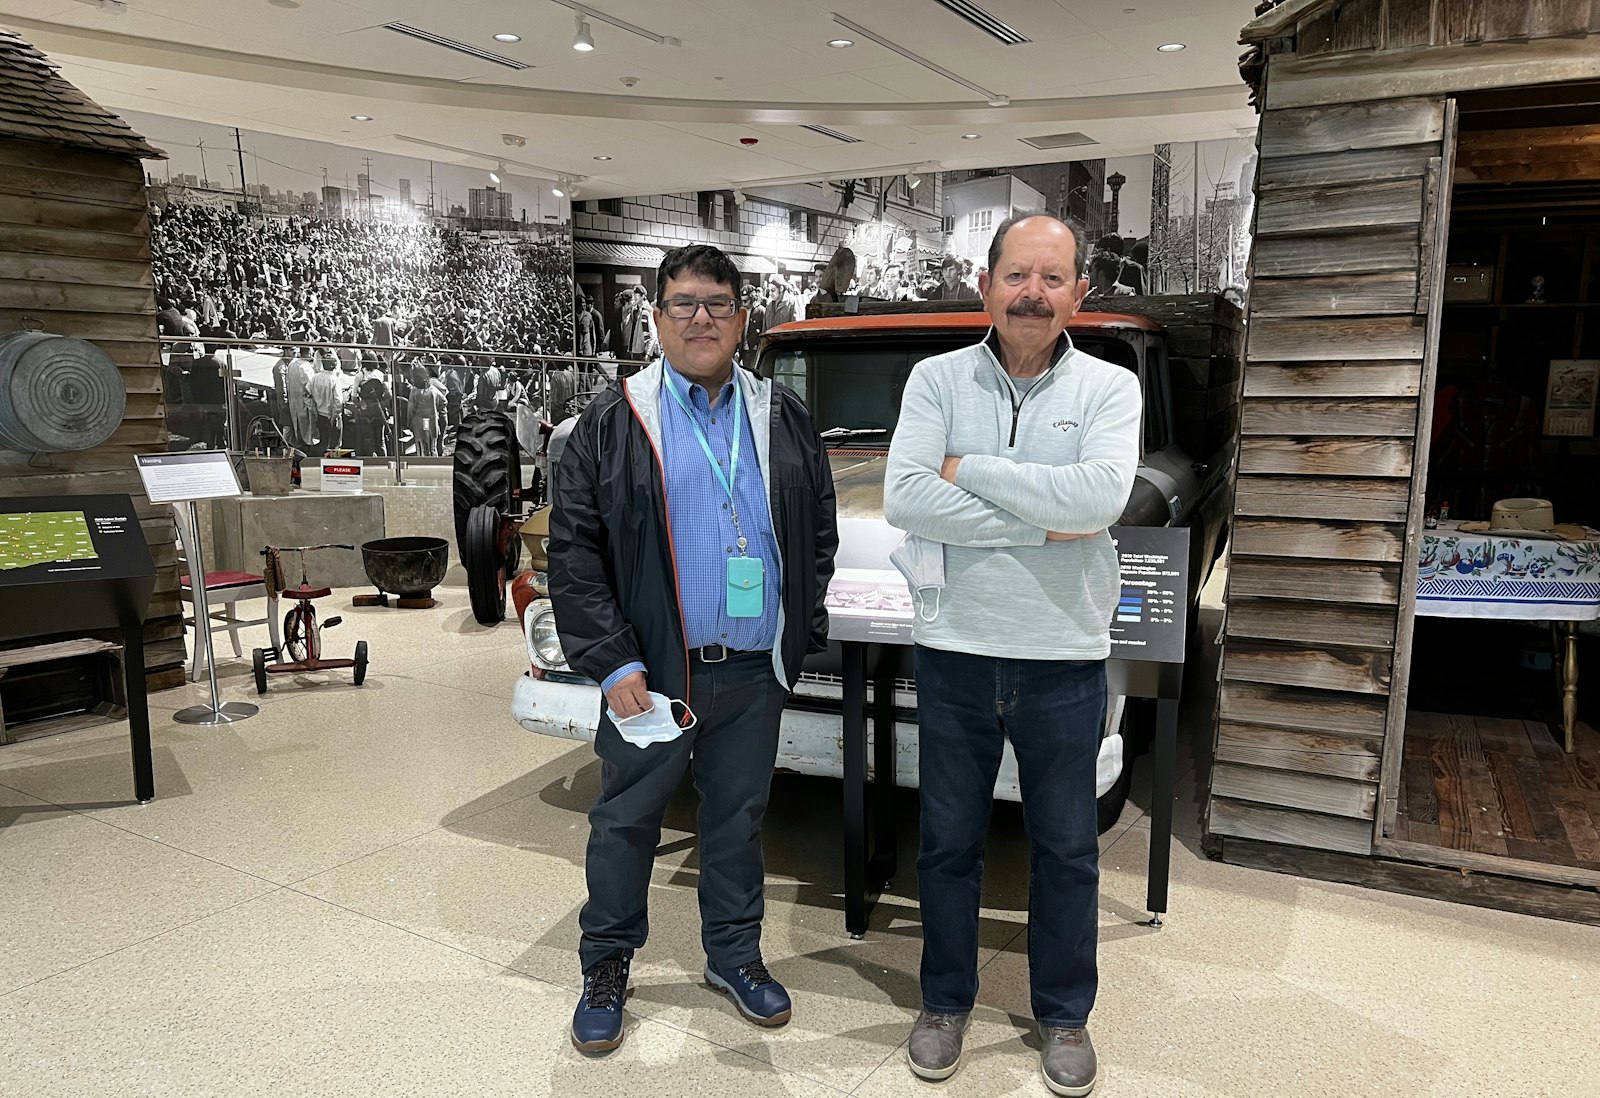 Dr. Jerry Garcia (left) and Dr. Erasmo Gamboa (right) at Sea Mar Museum of Chicano/a and Latino/a culture, in South Park. Behind them are cabins from Sunnyside, WA, which were previously housing for agricultural workers.